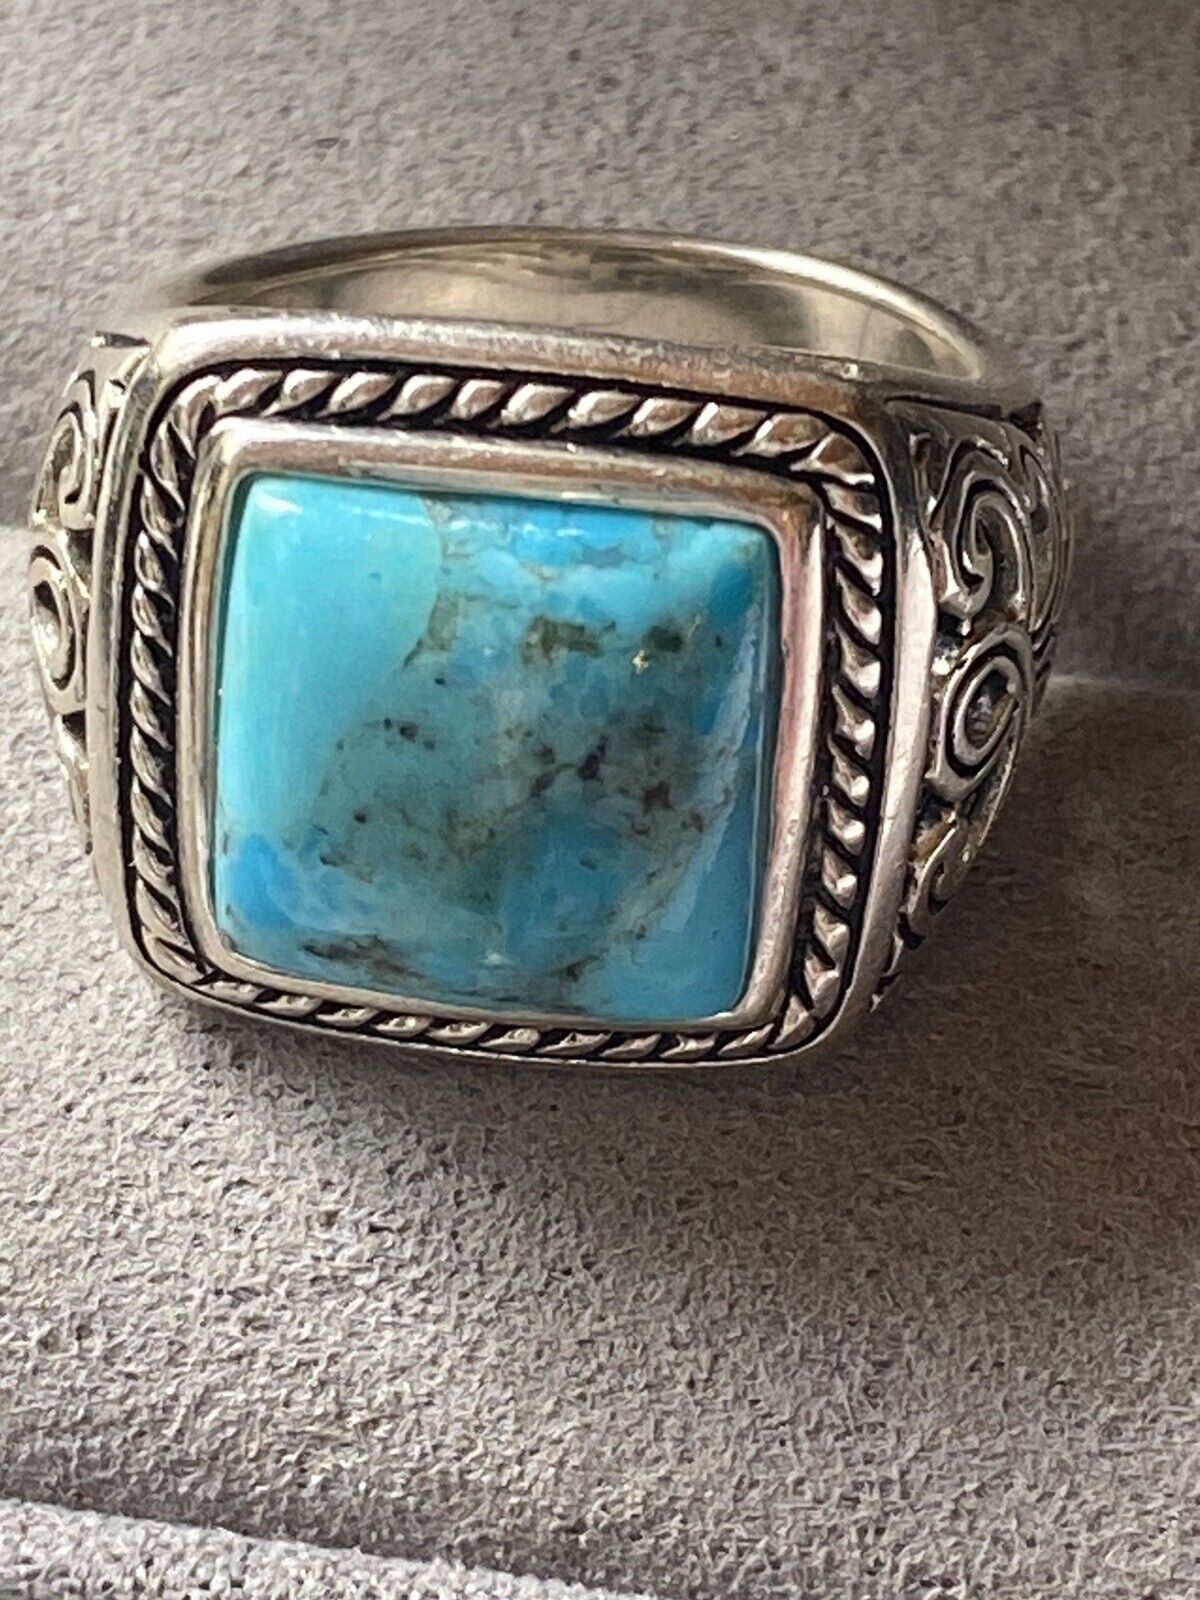 Heavy Navajo Blue Gem Turquoise and Sterling Silver Ring Sz. 9.5 Signed